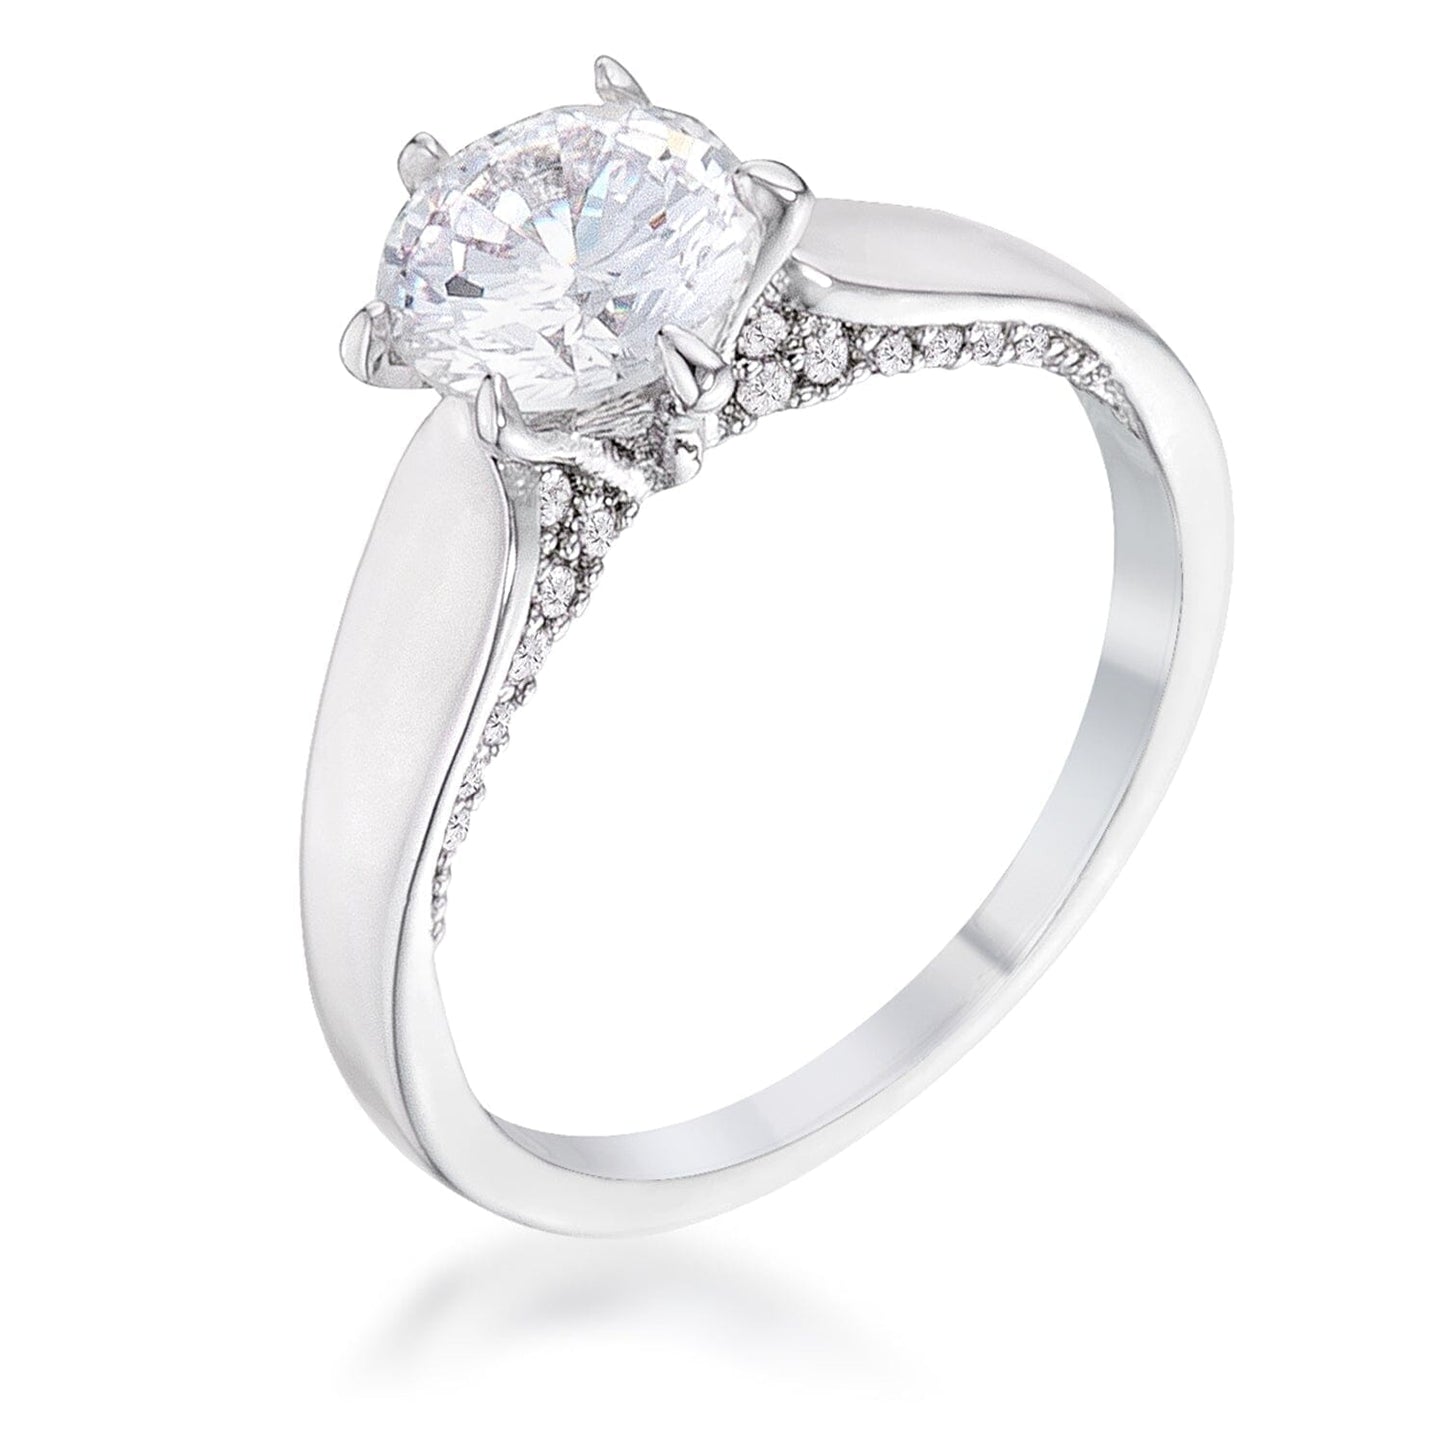 1.56Ct Contemporary Rhodium Plated Cubic Zirconia Solitaire Ring Rings Das Juwel 